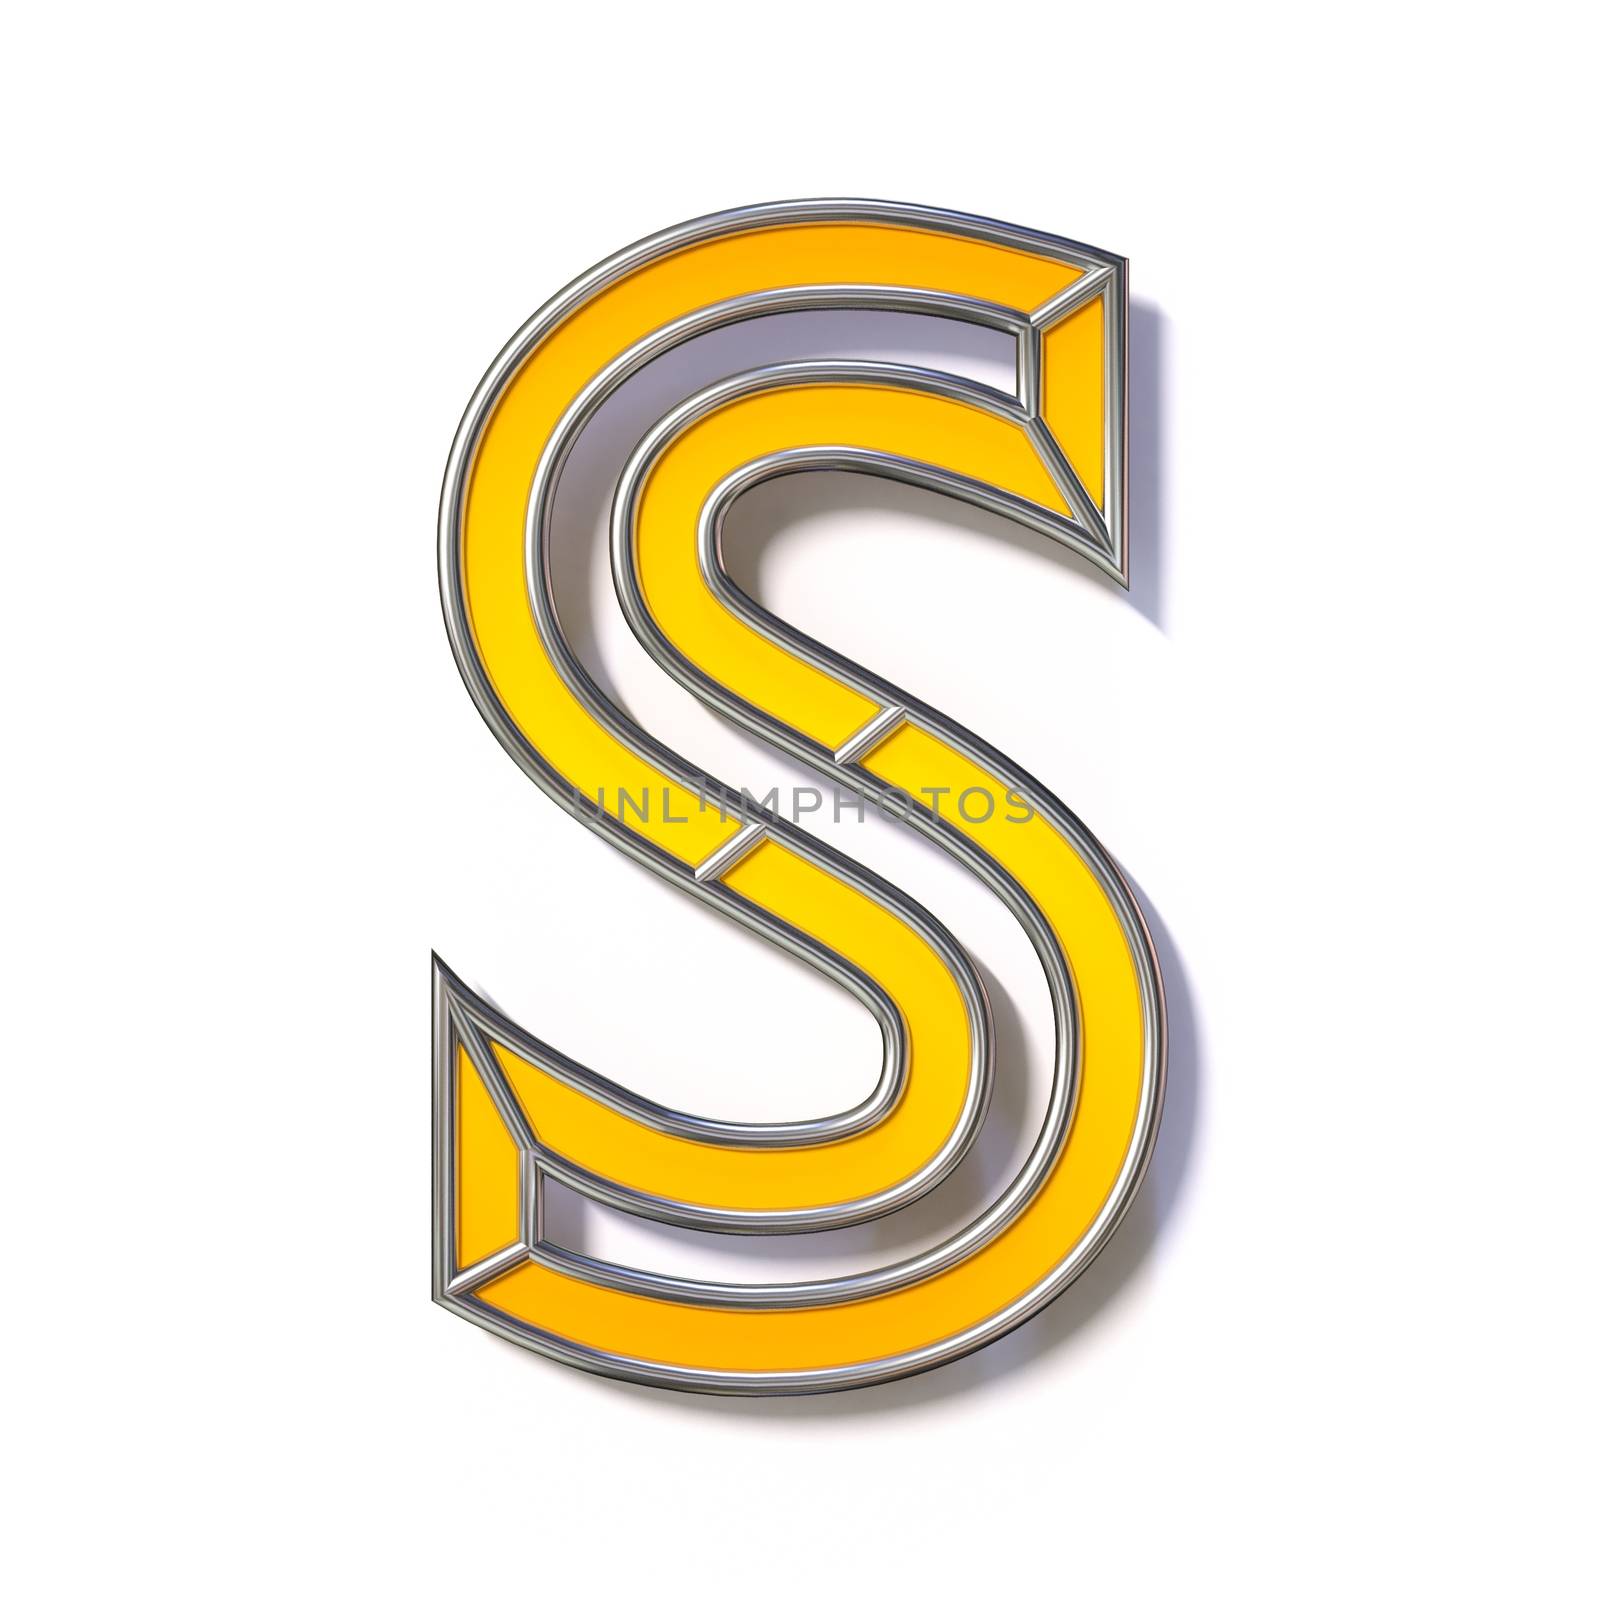 Orange metal wire font Letter S 3D rendering illustration isolated on white background